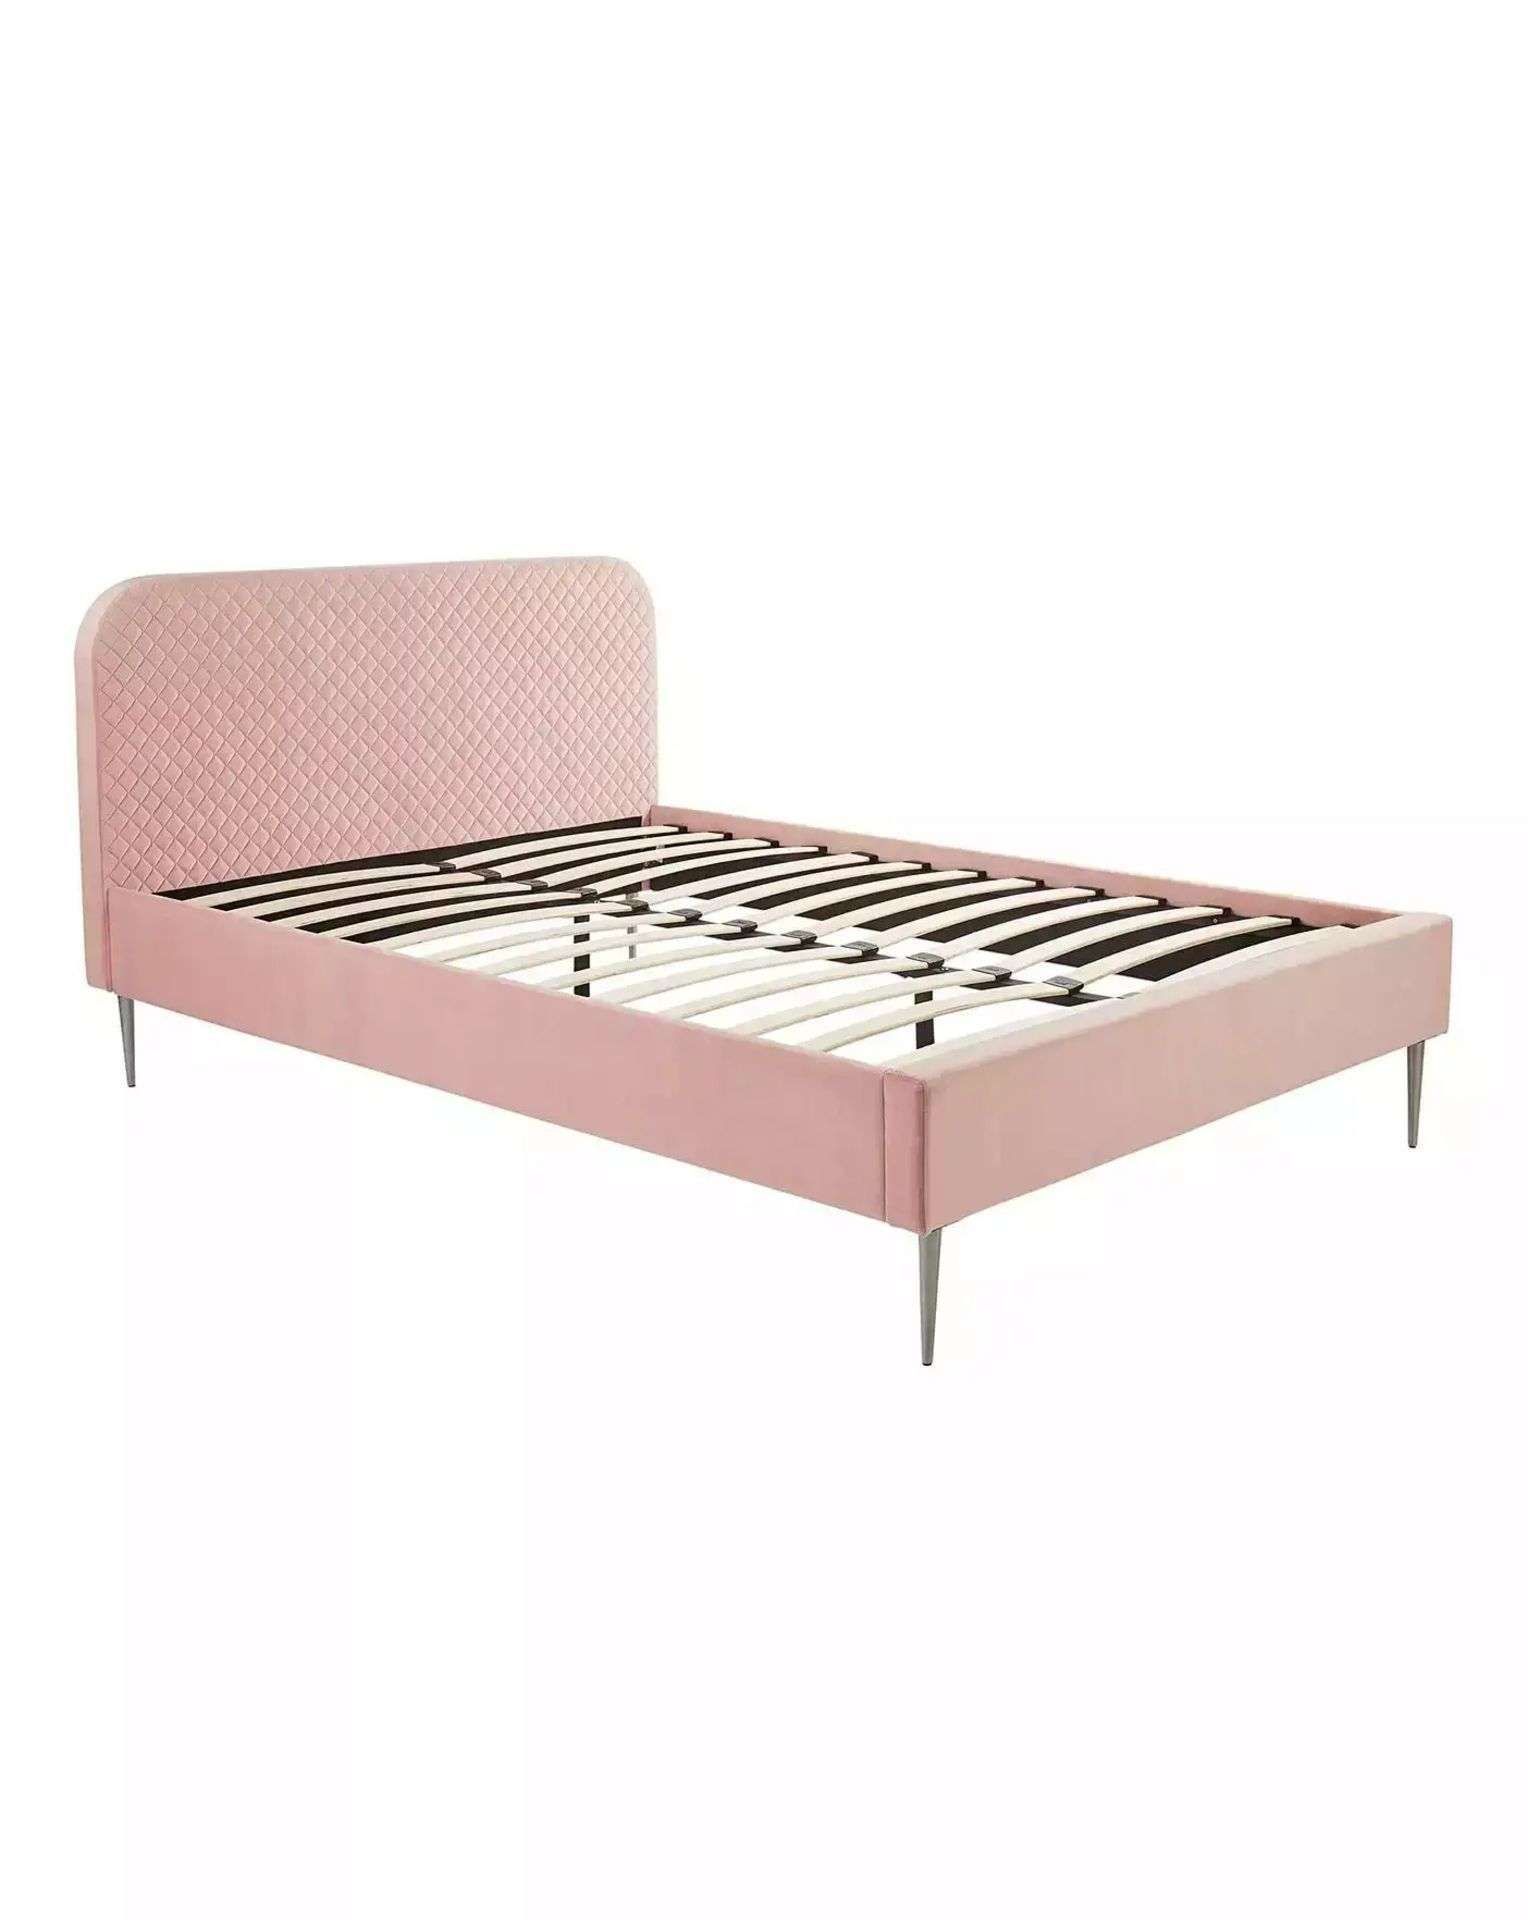 BRAND NEW ARDEN Quilted DOUBLE Bed Frame. PEWTER. RRP £339 EACH. The Arden Quilted Bed is the - Bild 2 aus 2